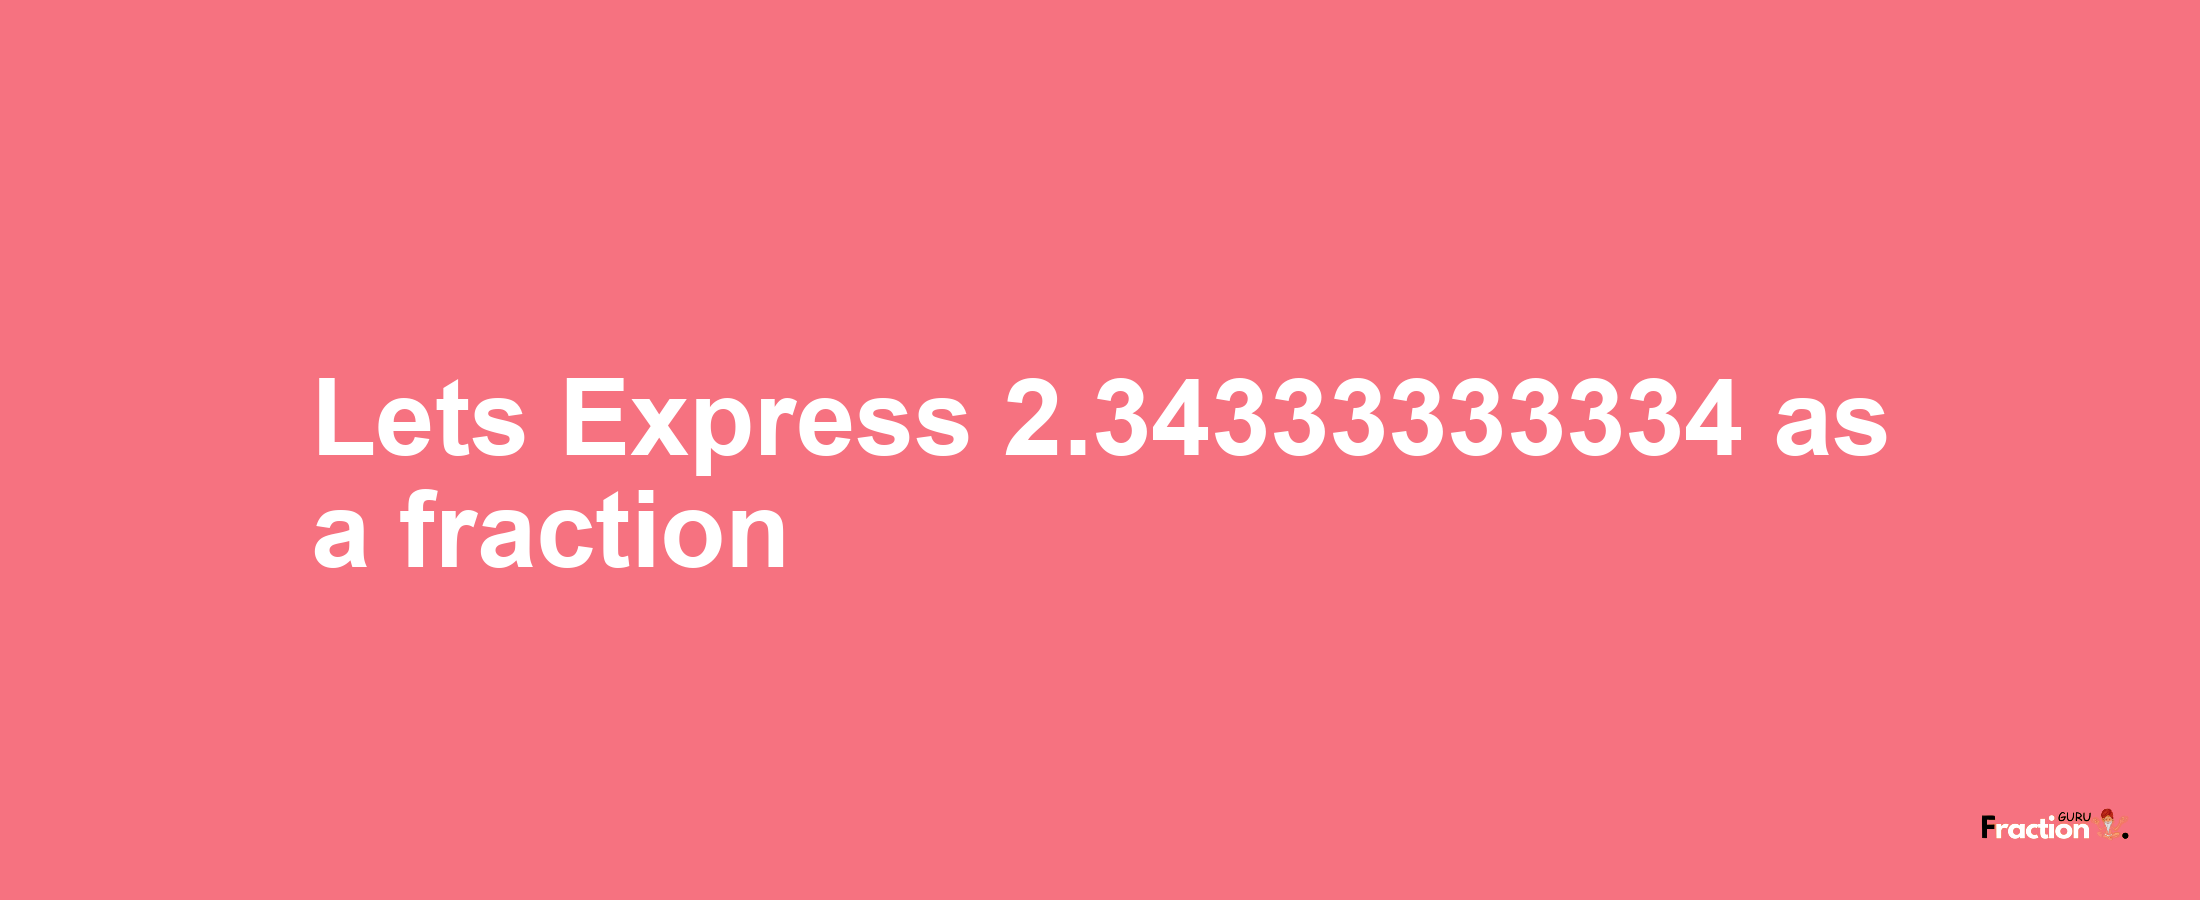 Lets Express 2.34333333334 as afraction